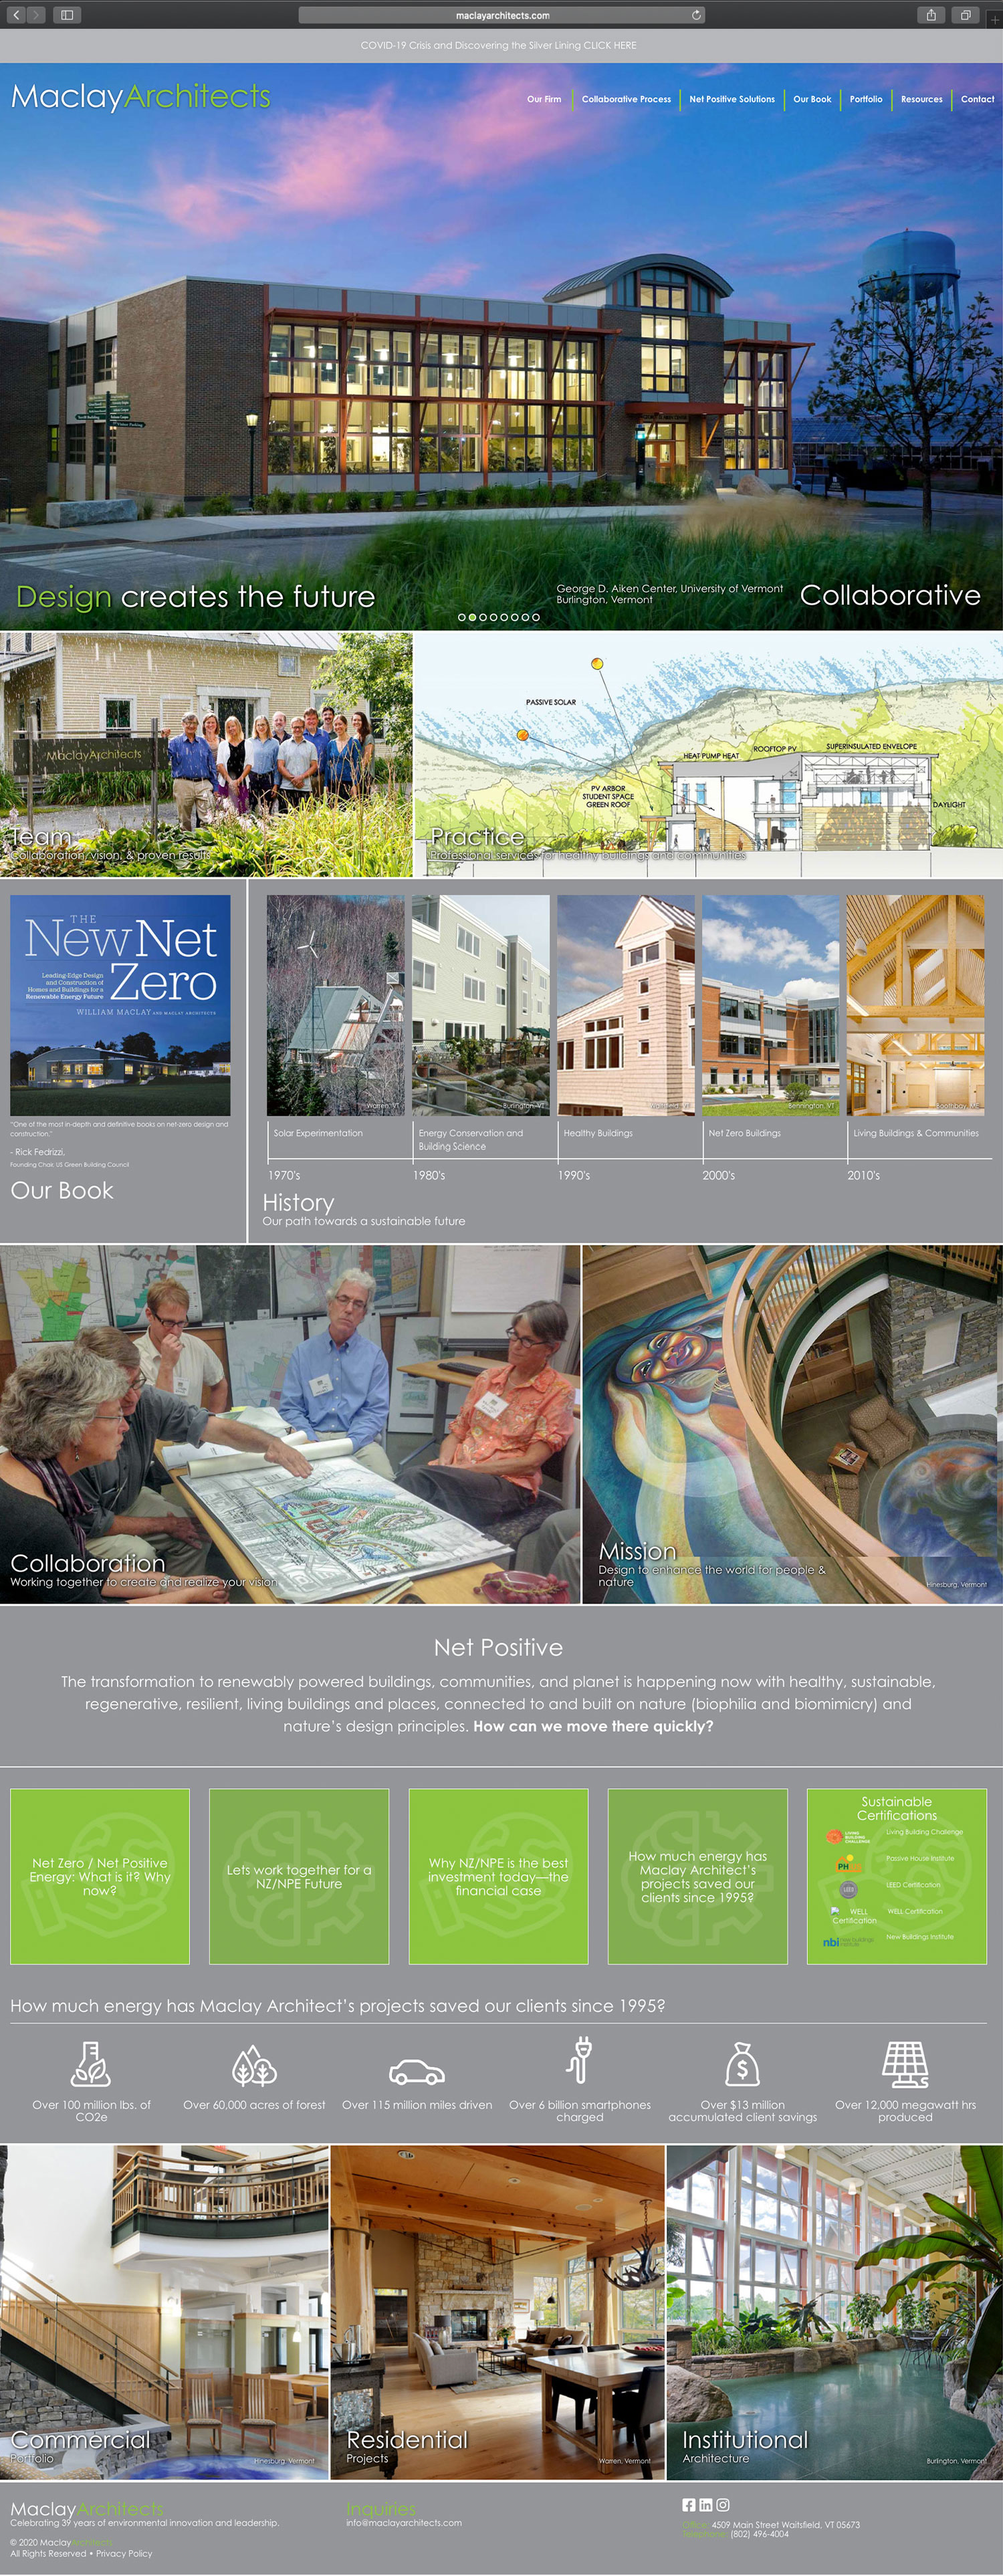 Website design and website development for Maclay Architects - homepage view.